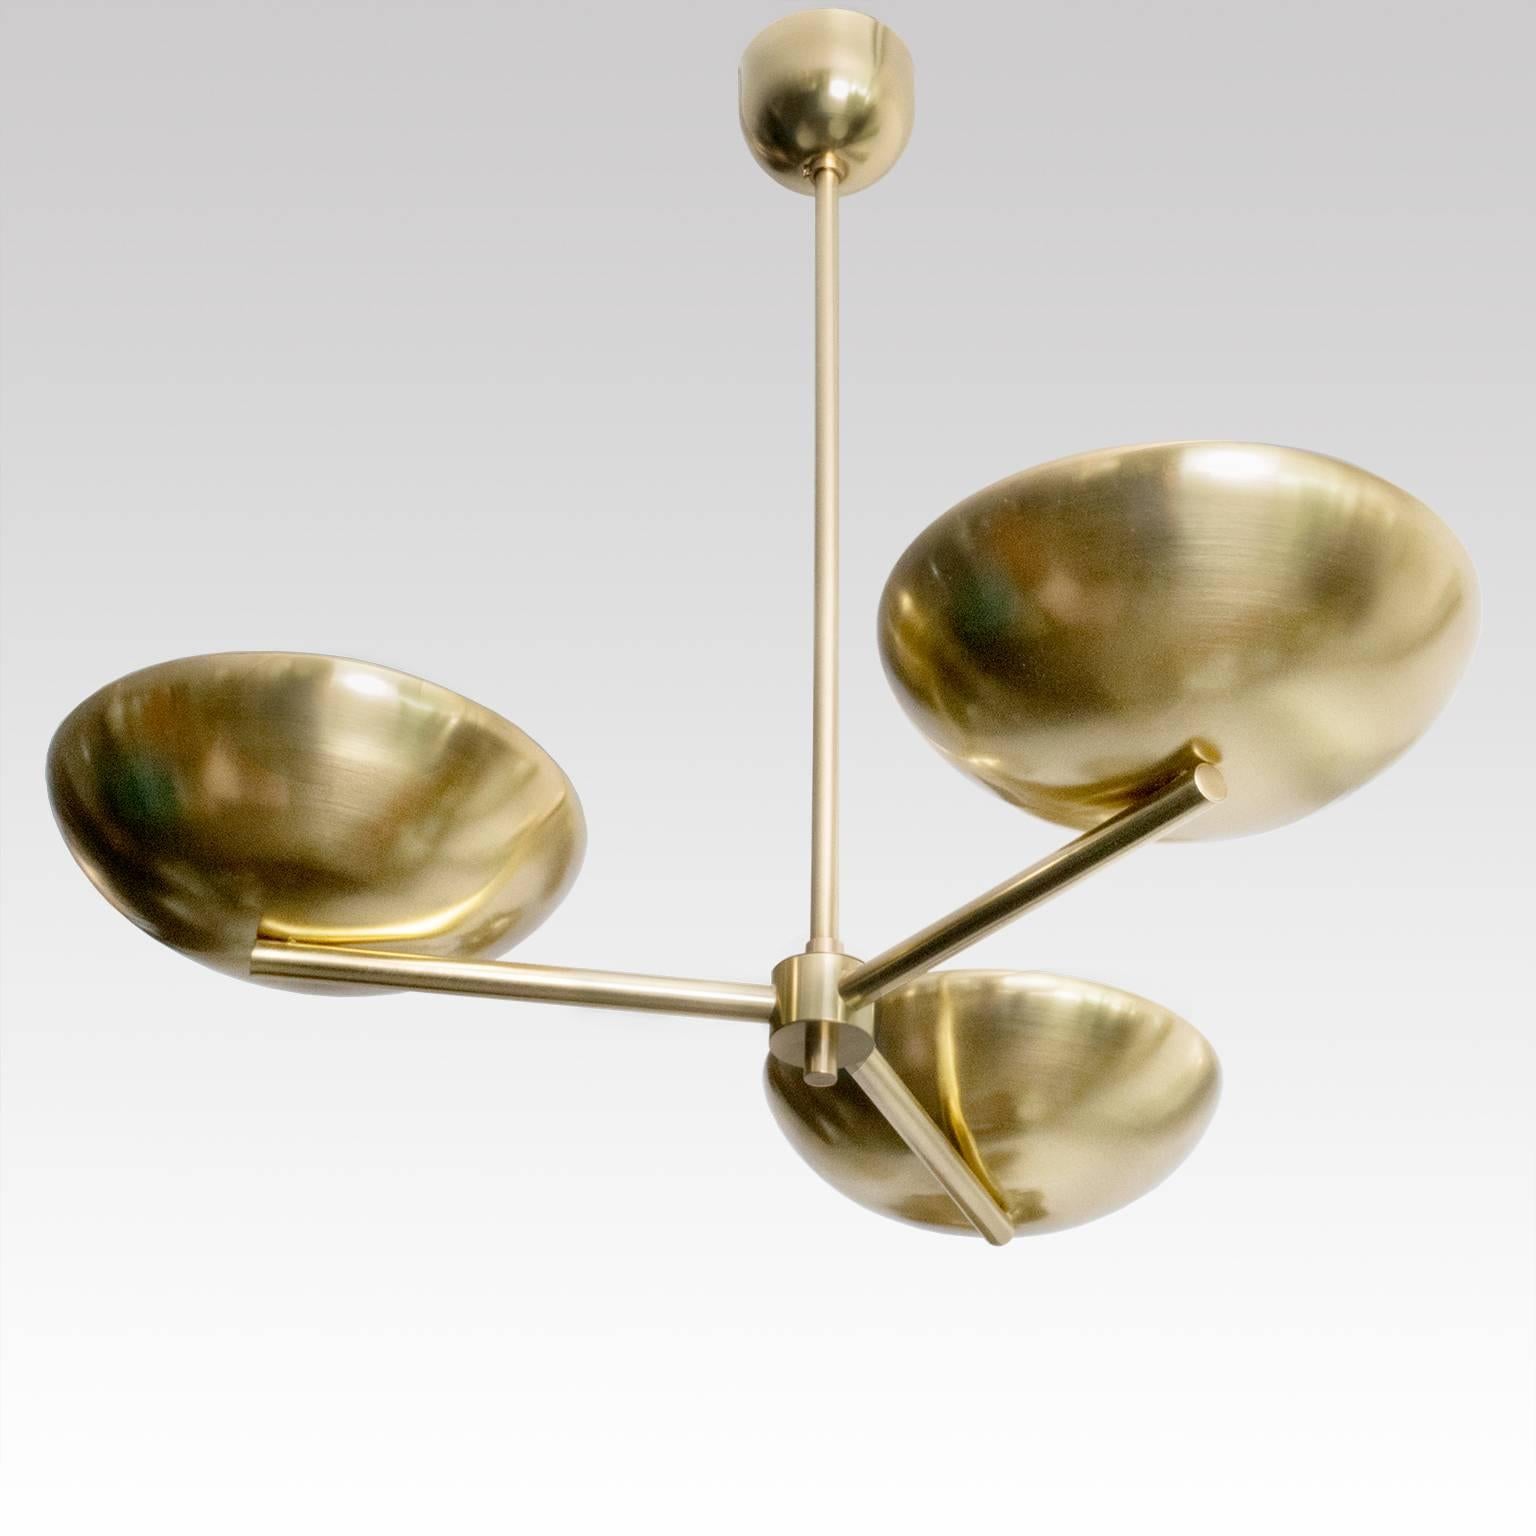 Scandinavian Modern three-arm polished brass pendant. The three bowl shaped shades delicately balance at the end of each arm. Newly polished and lacquered, rewired with three standard Edison base sockets for use in the USA.
 
Measures: Height 25